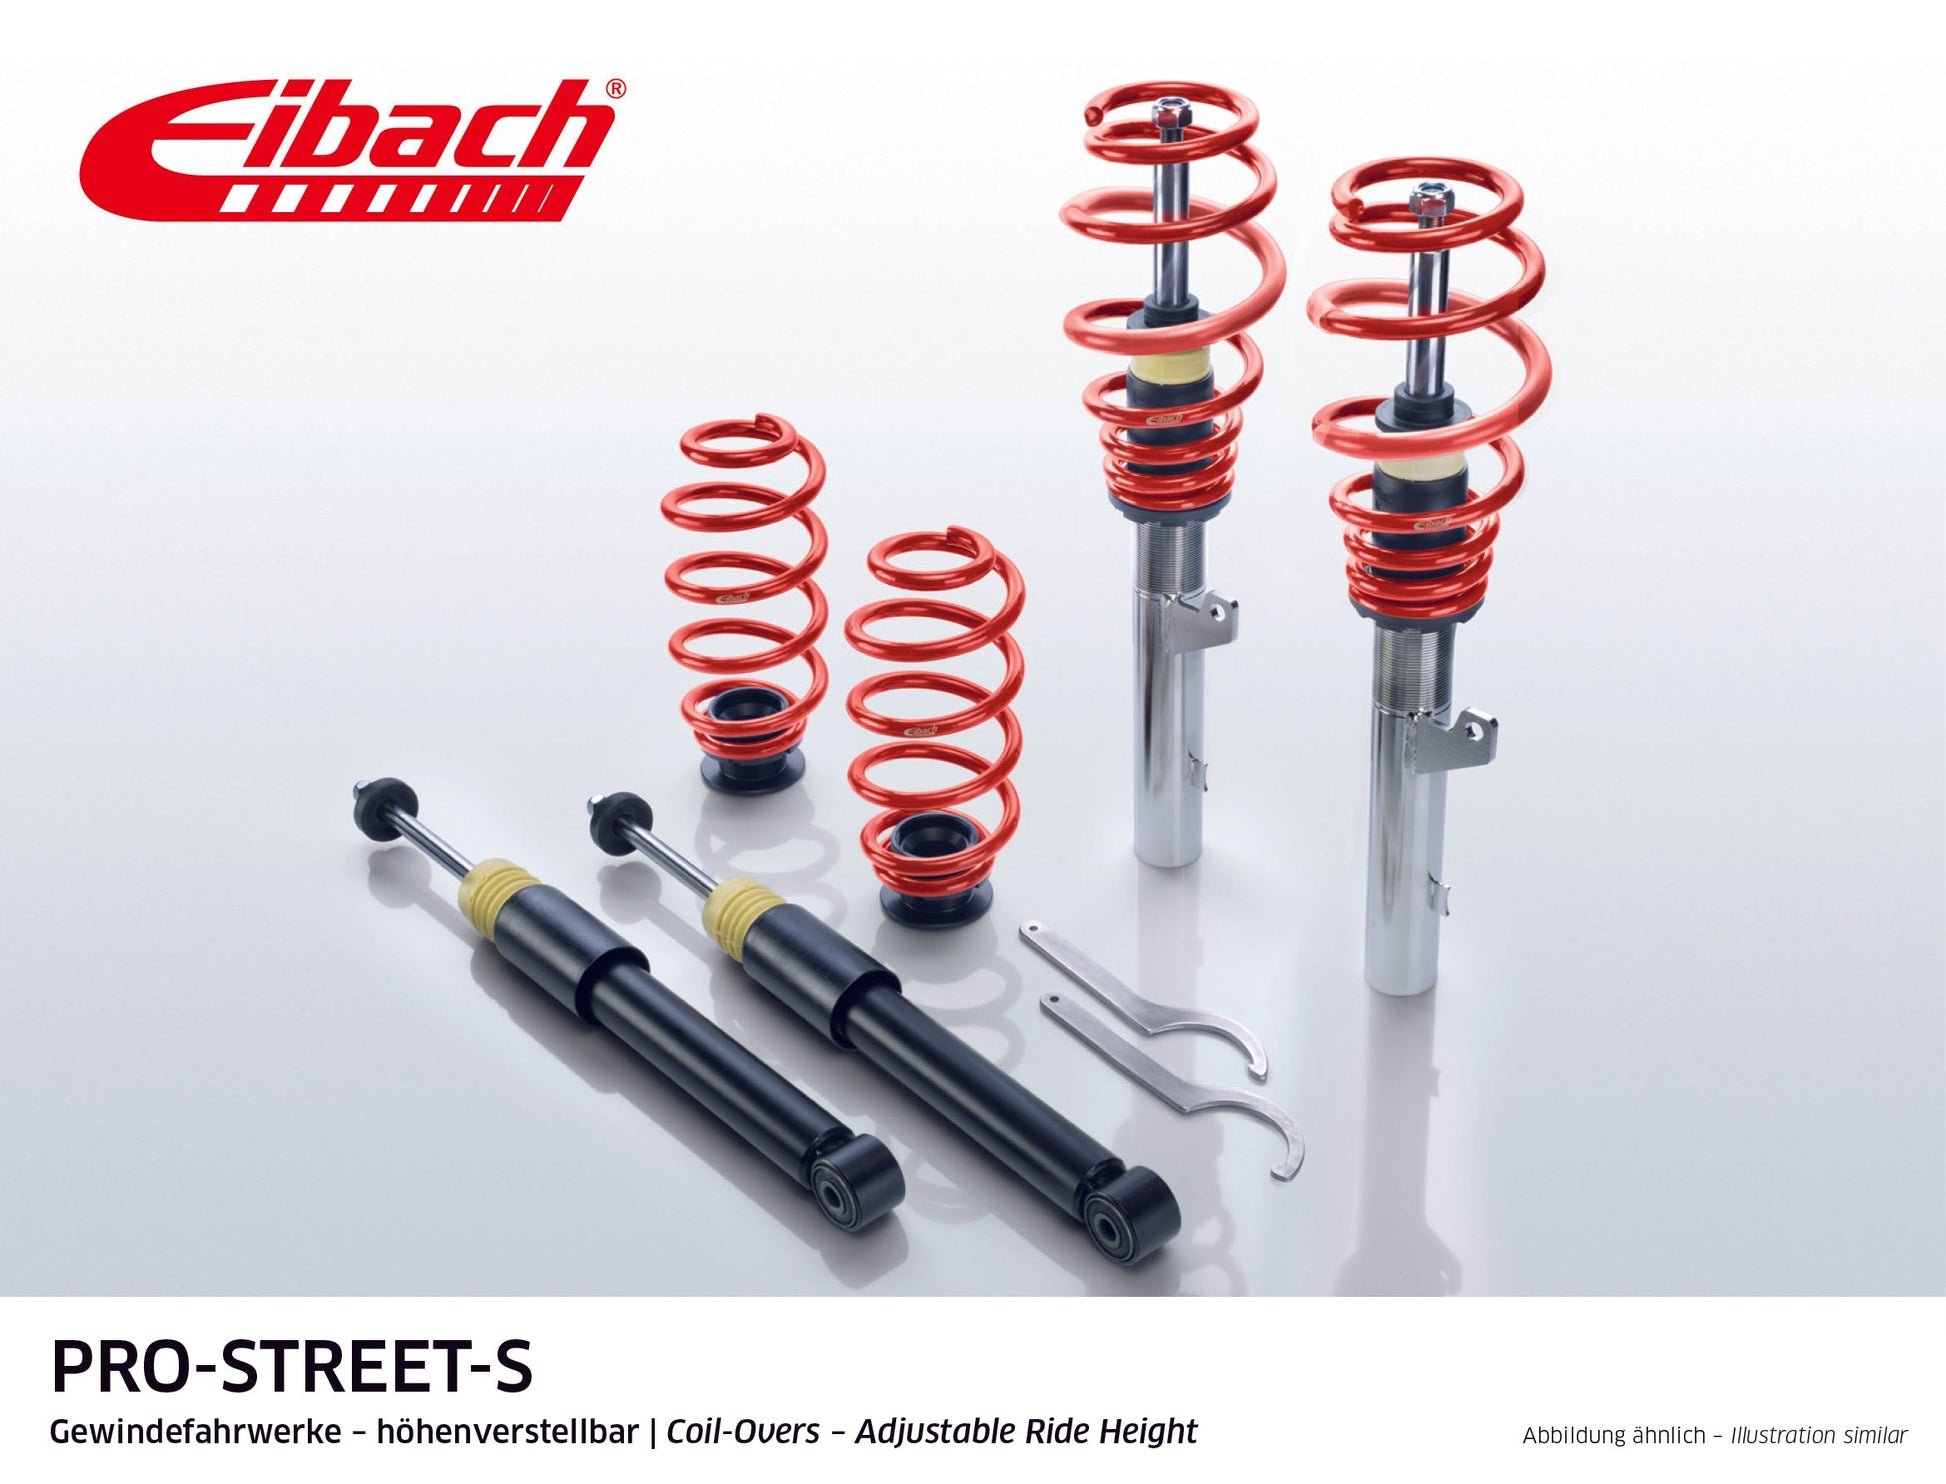 Eibach Pro-Street Coilover (PSS65-15-006-03-22) at £1217.92